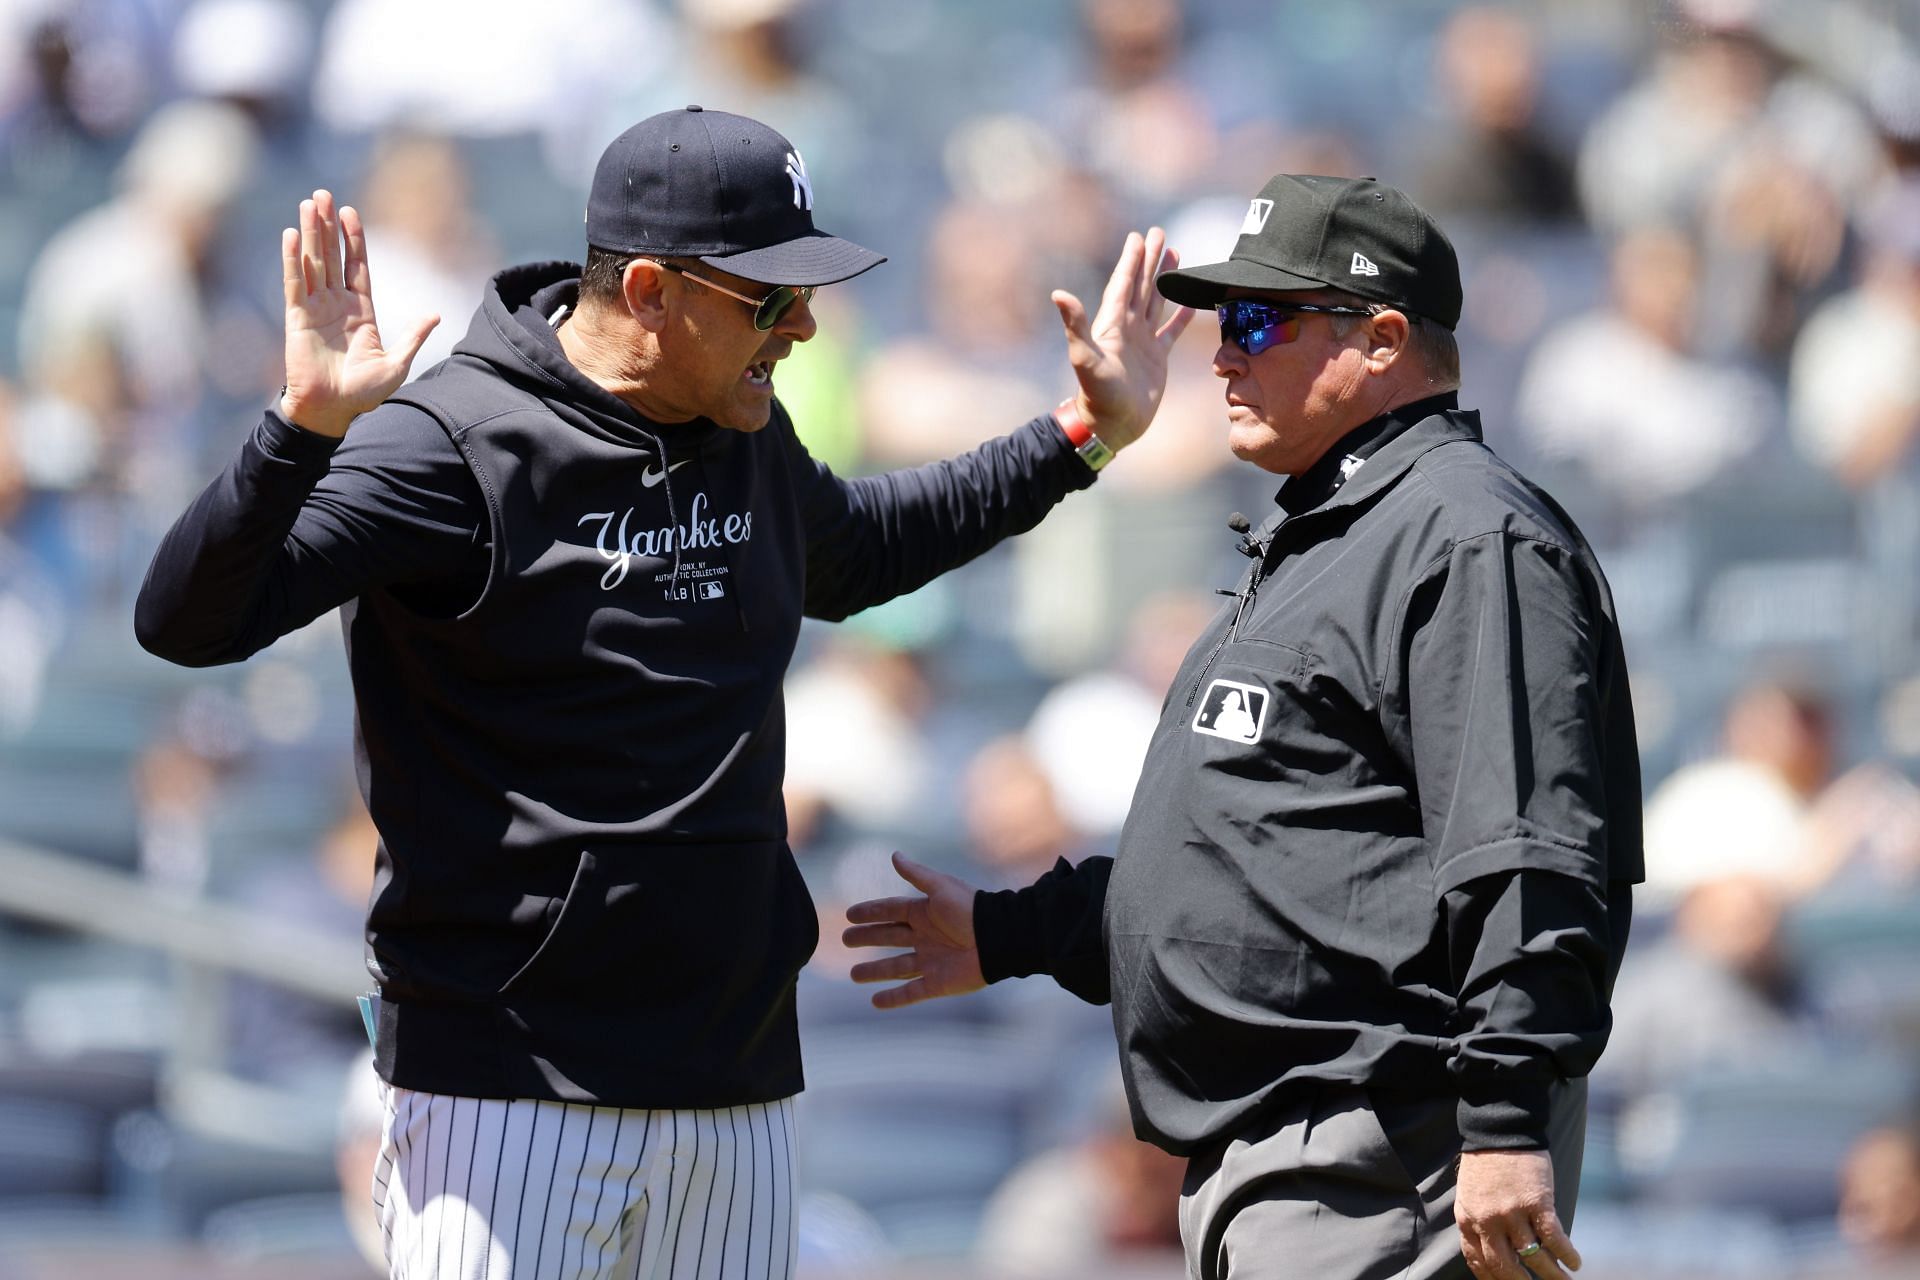 Aaron Boone arguing with the umpire